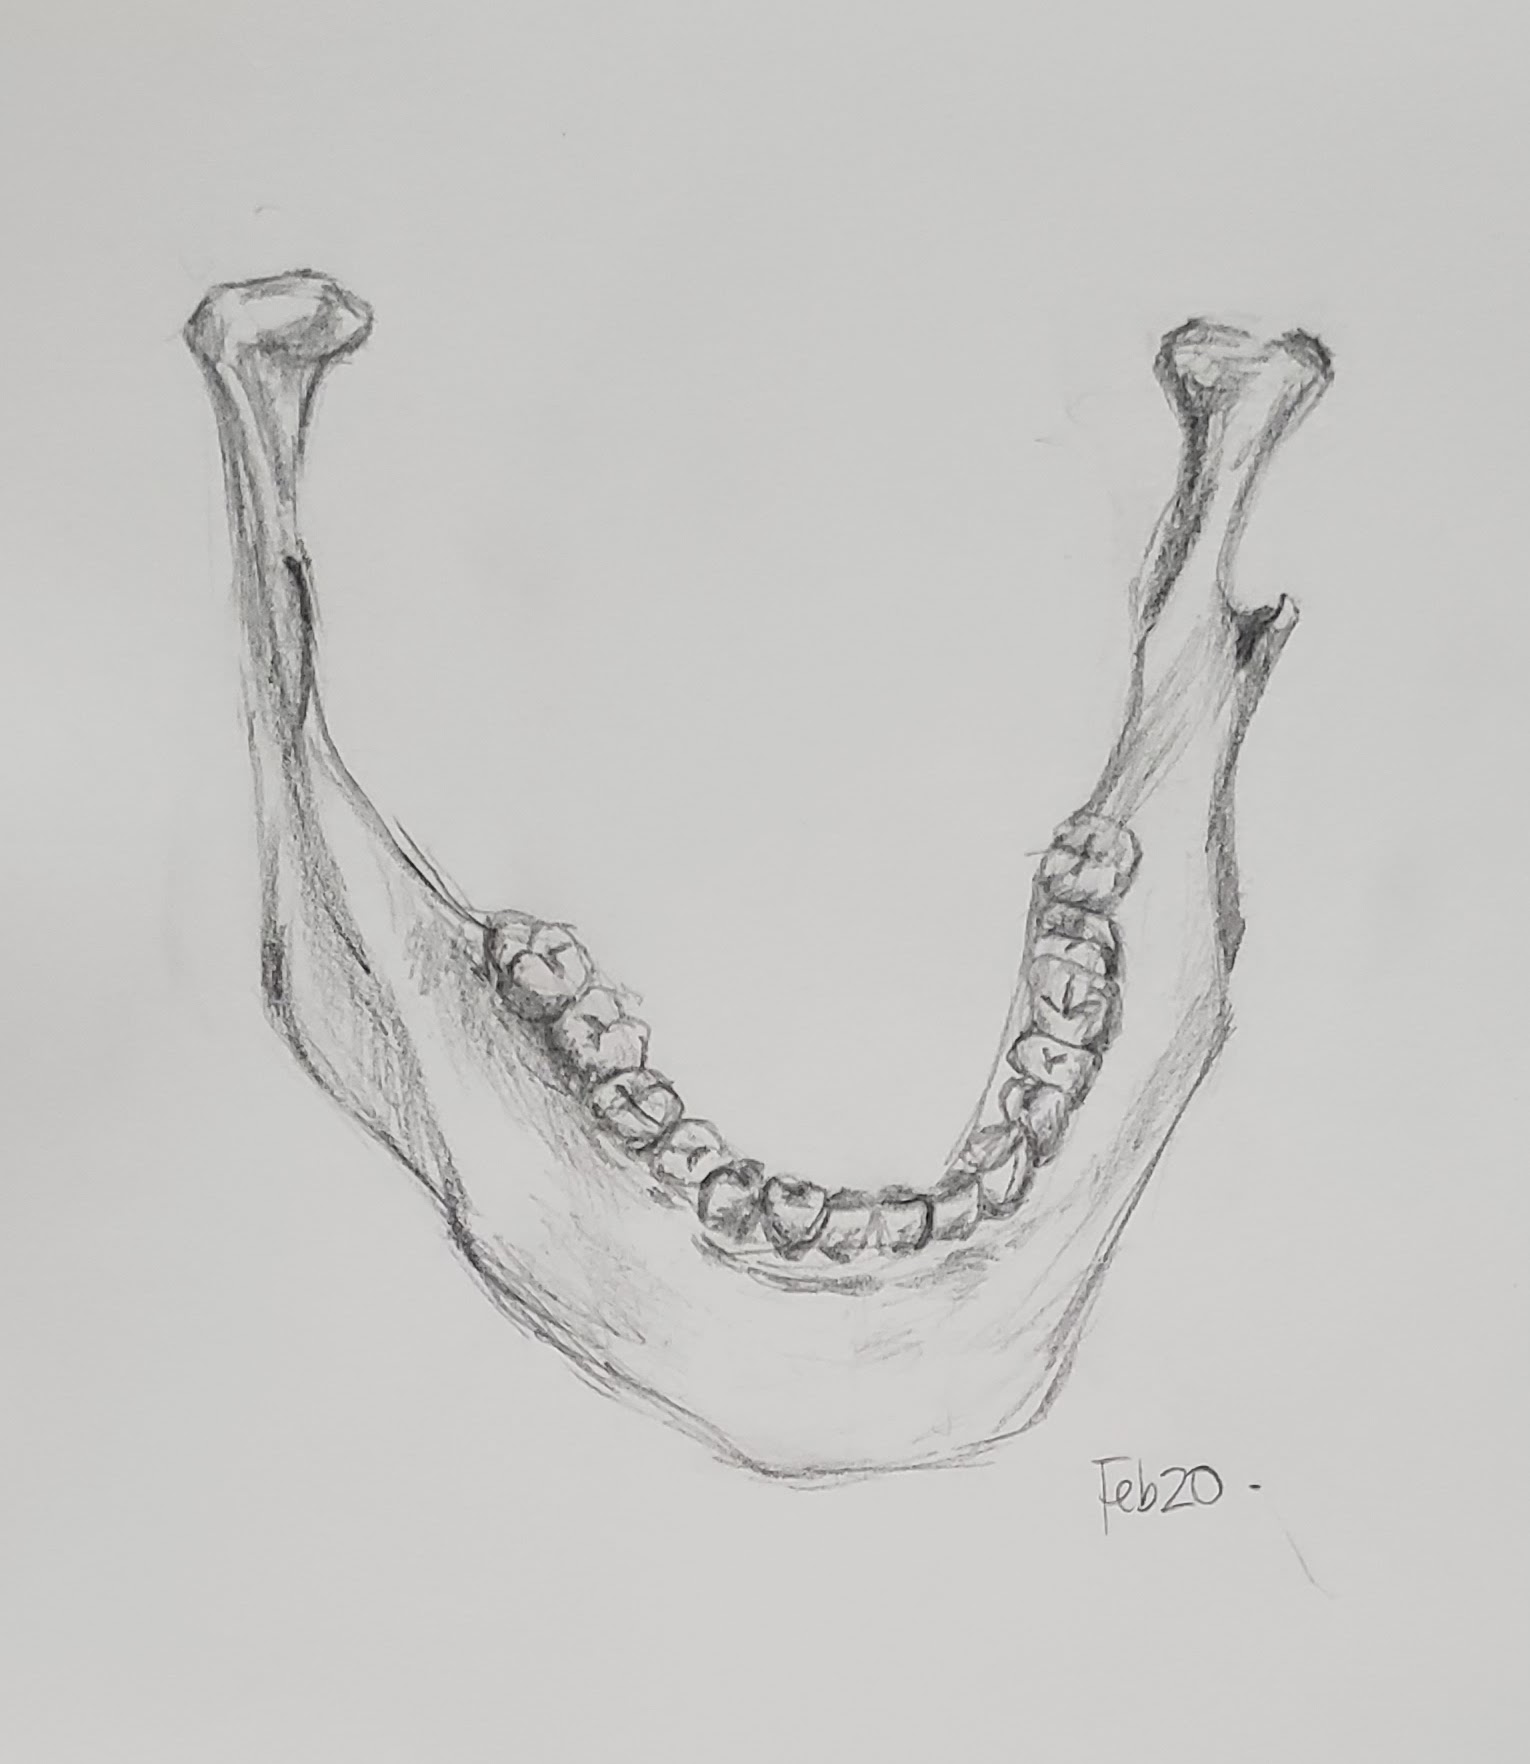 anatomy drawing of lower mandible with teeth jaw bone skeleton black and white grey pencil graphite